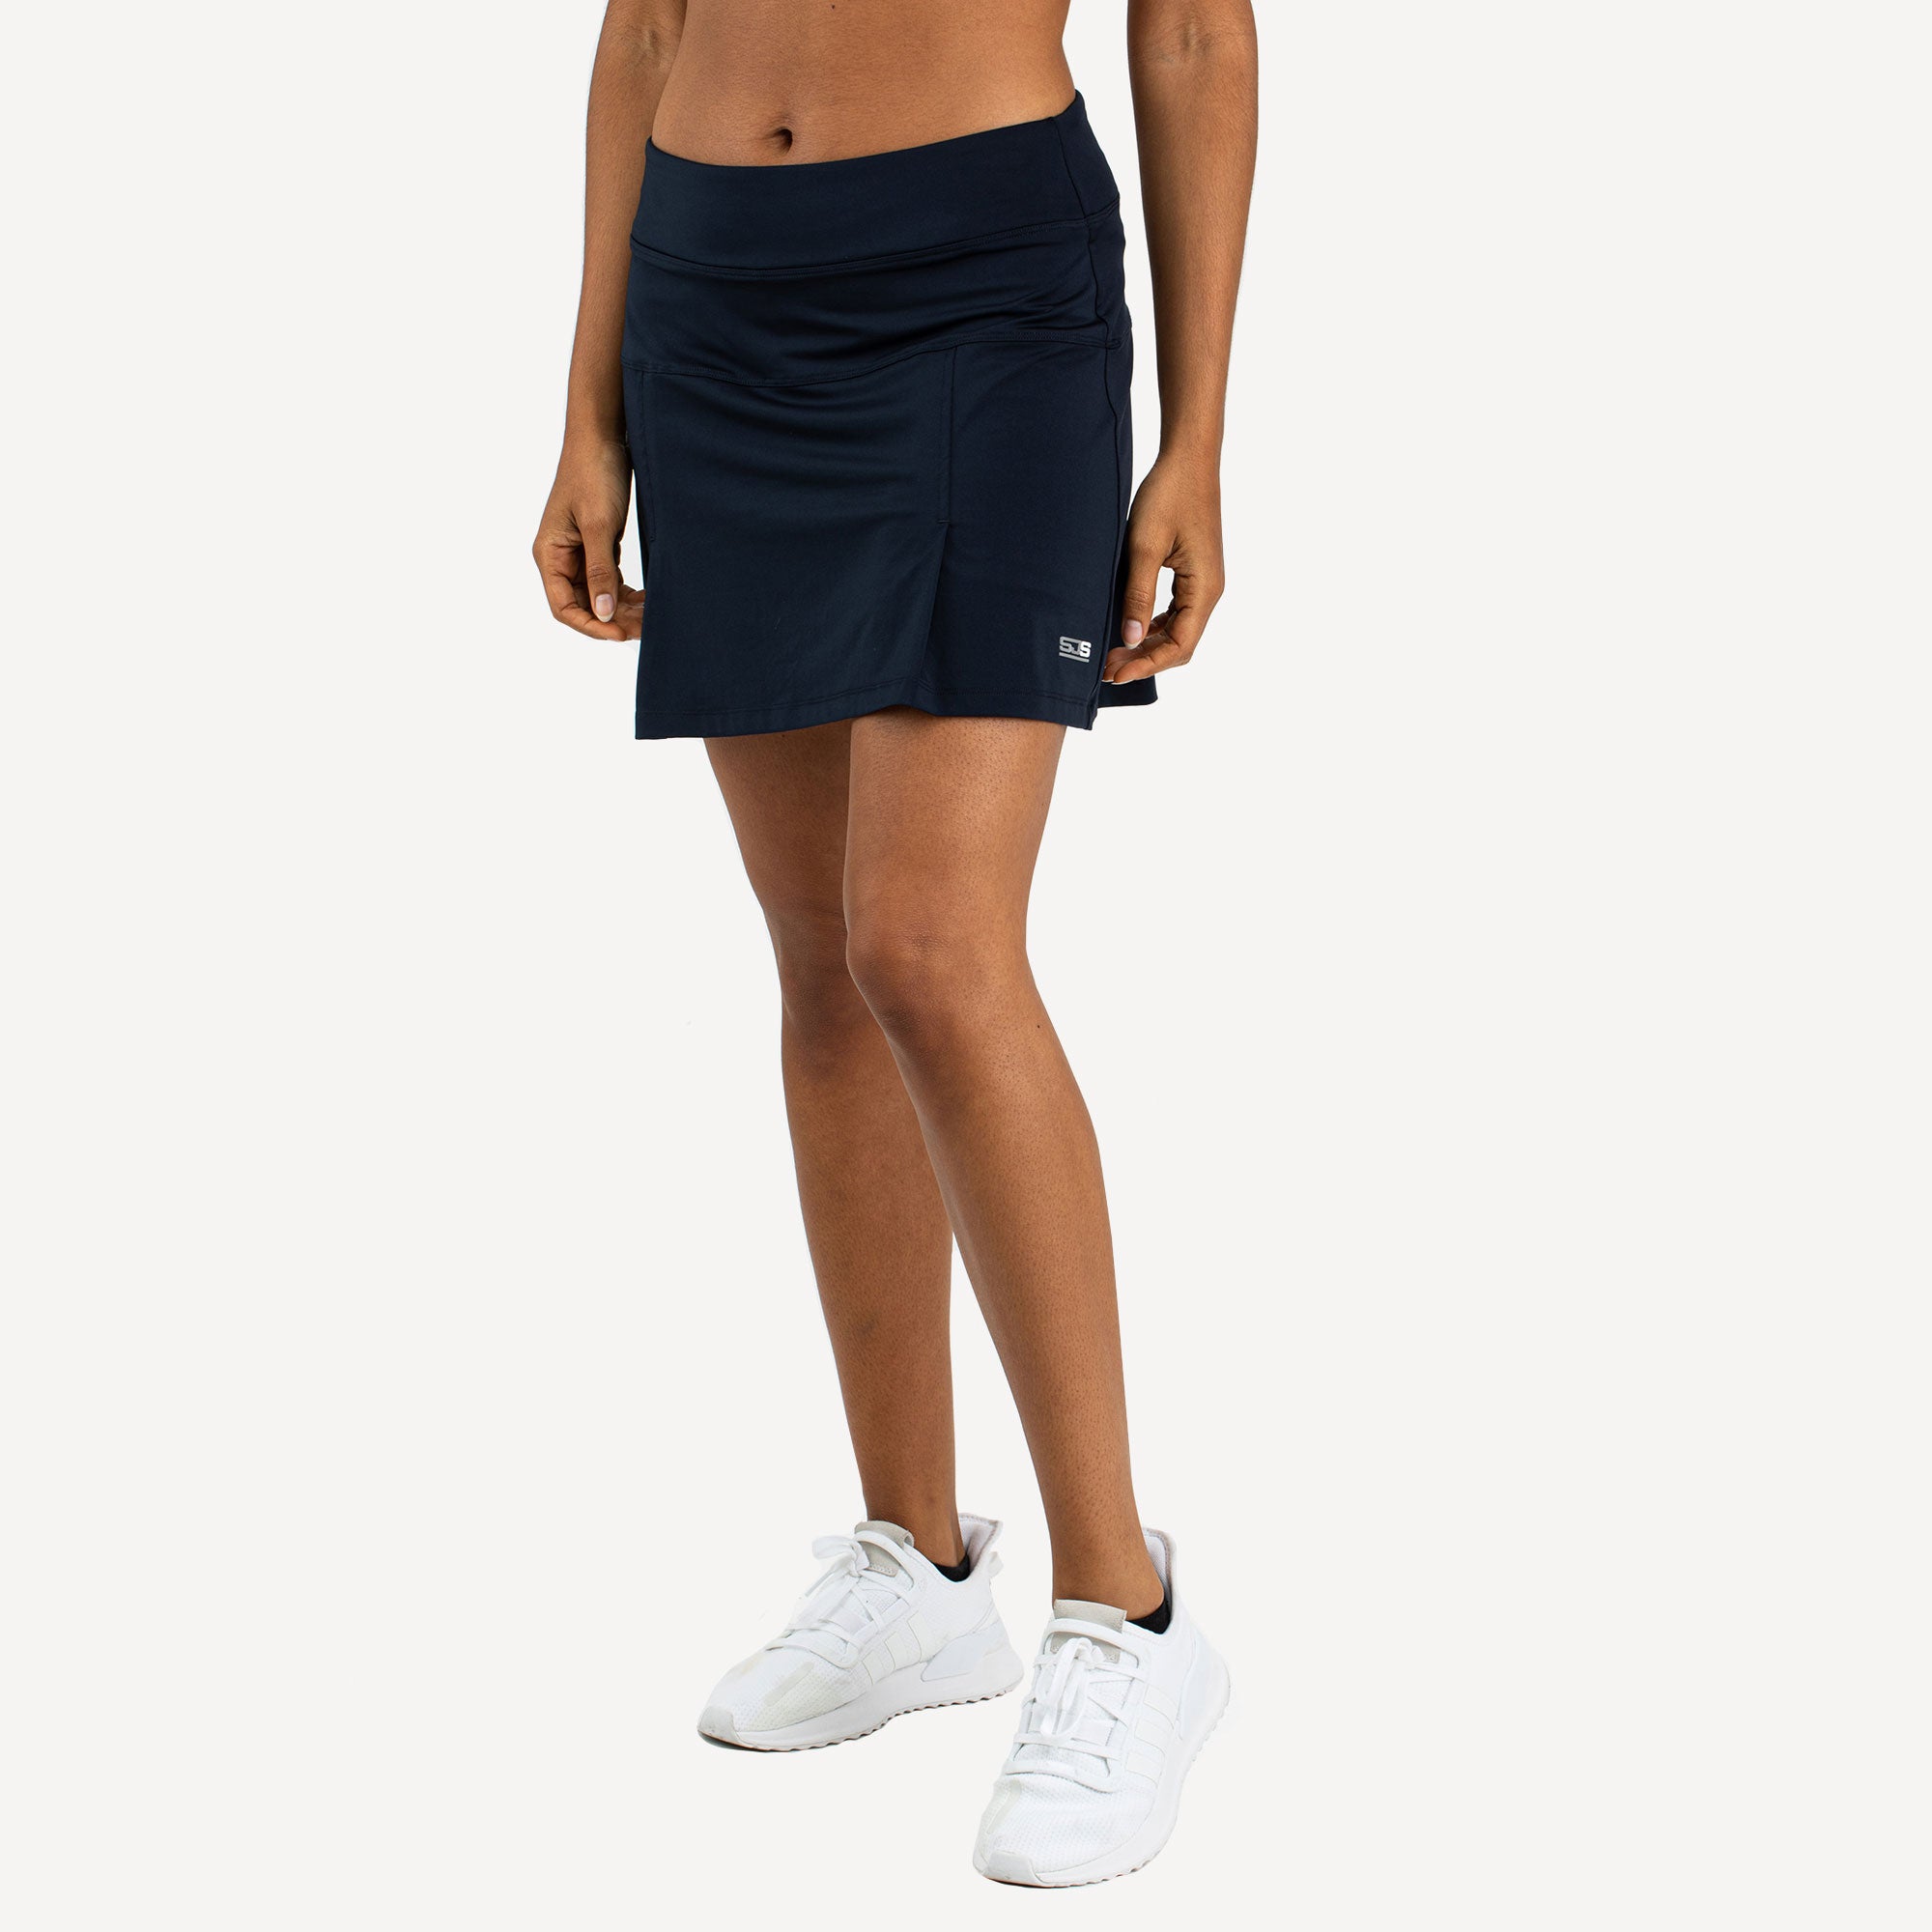 Sjeng Sports Women's Outfit 02 | Tennis Only